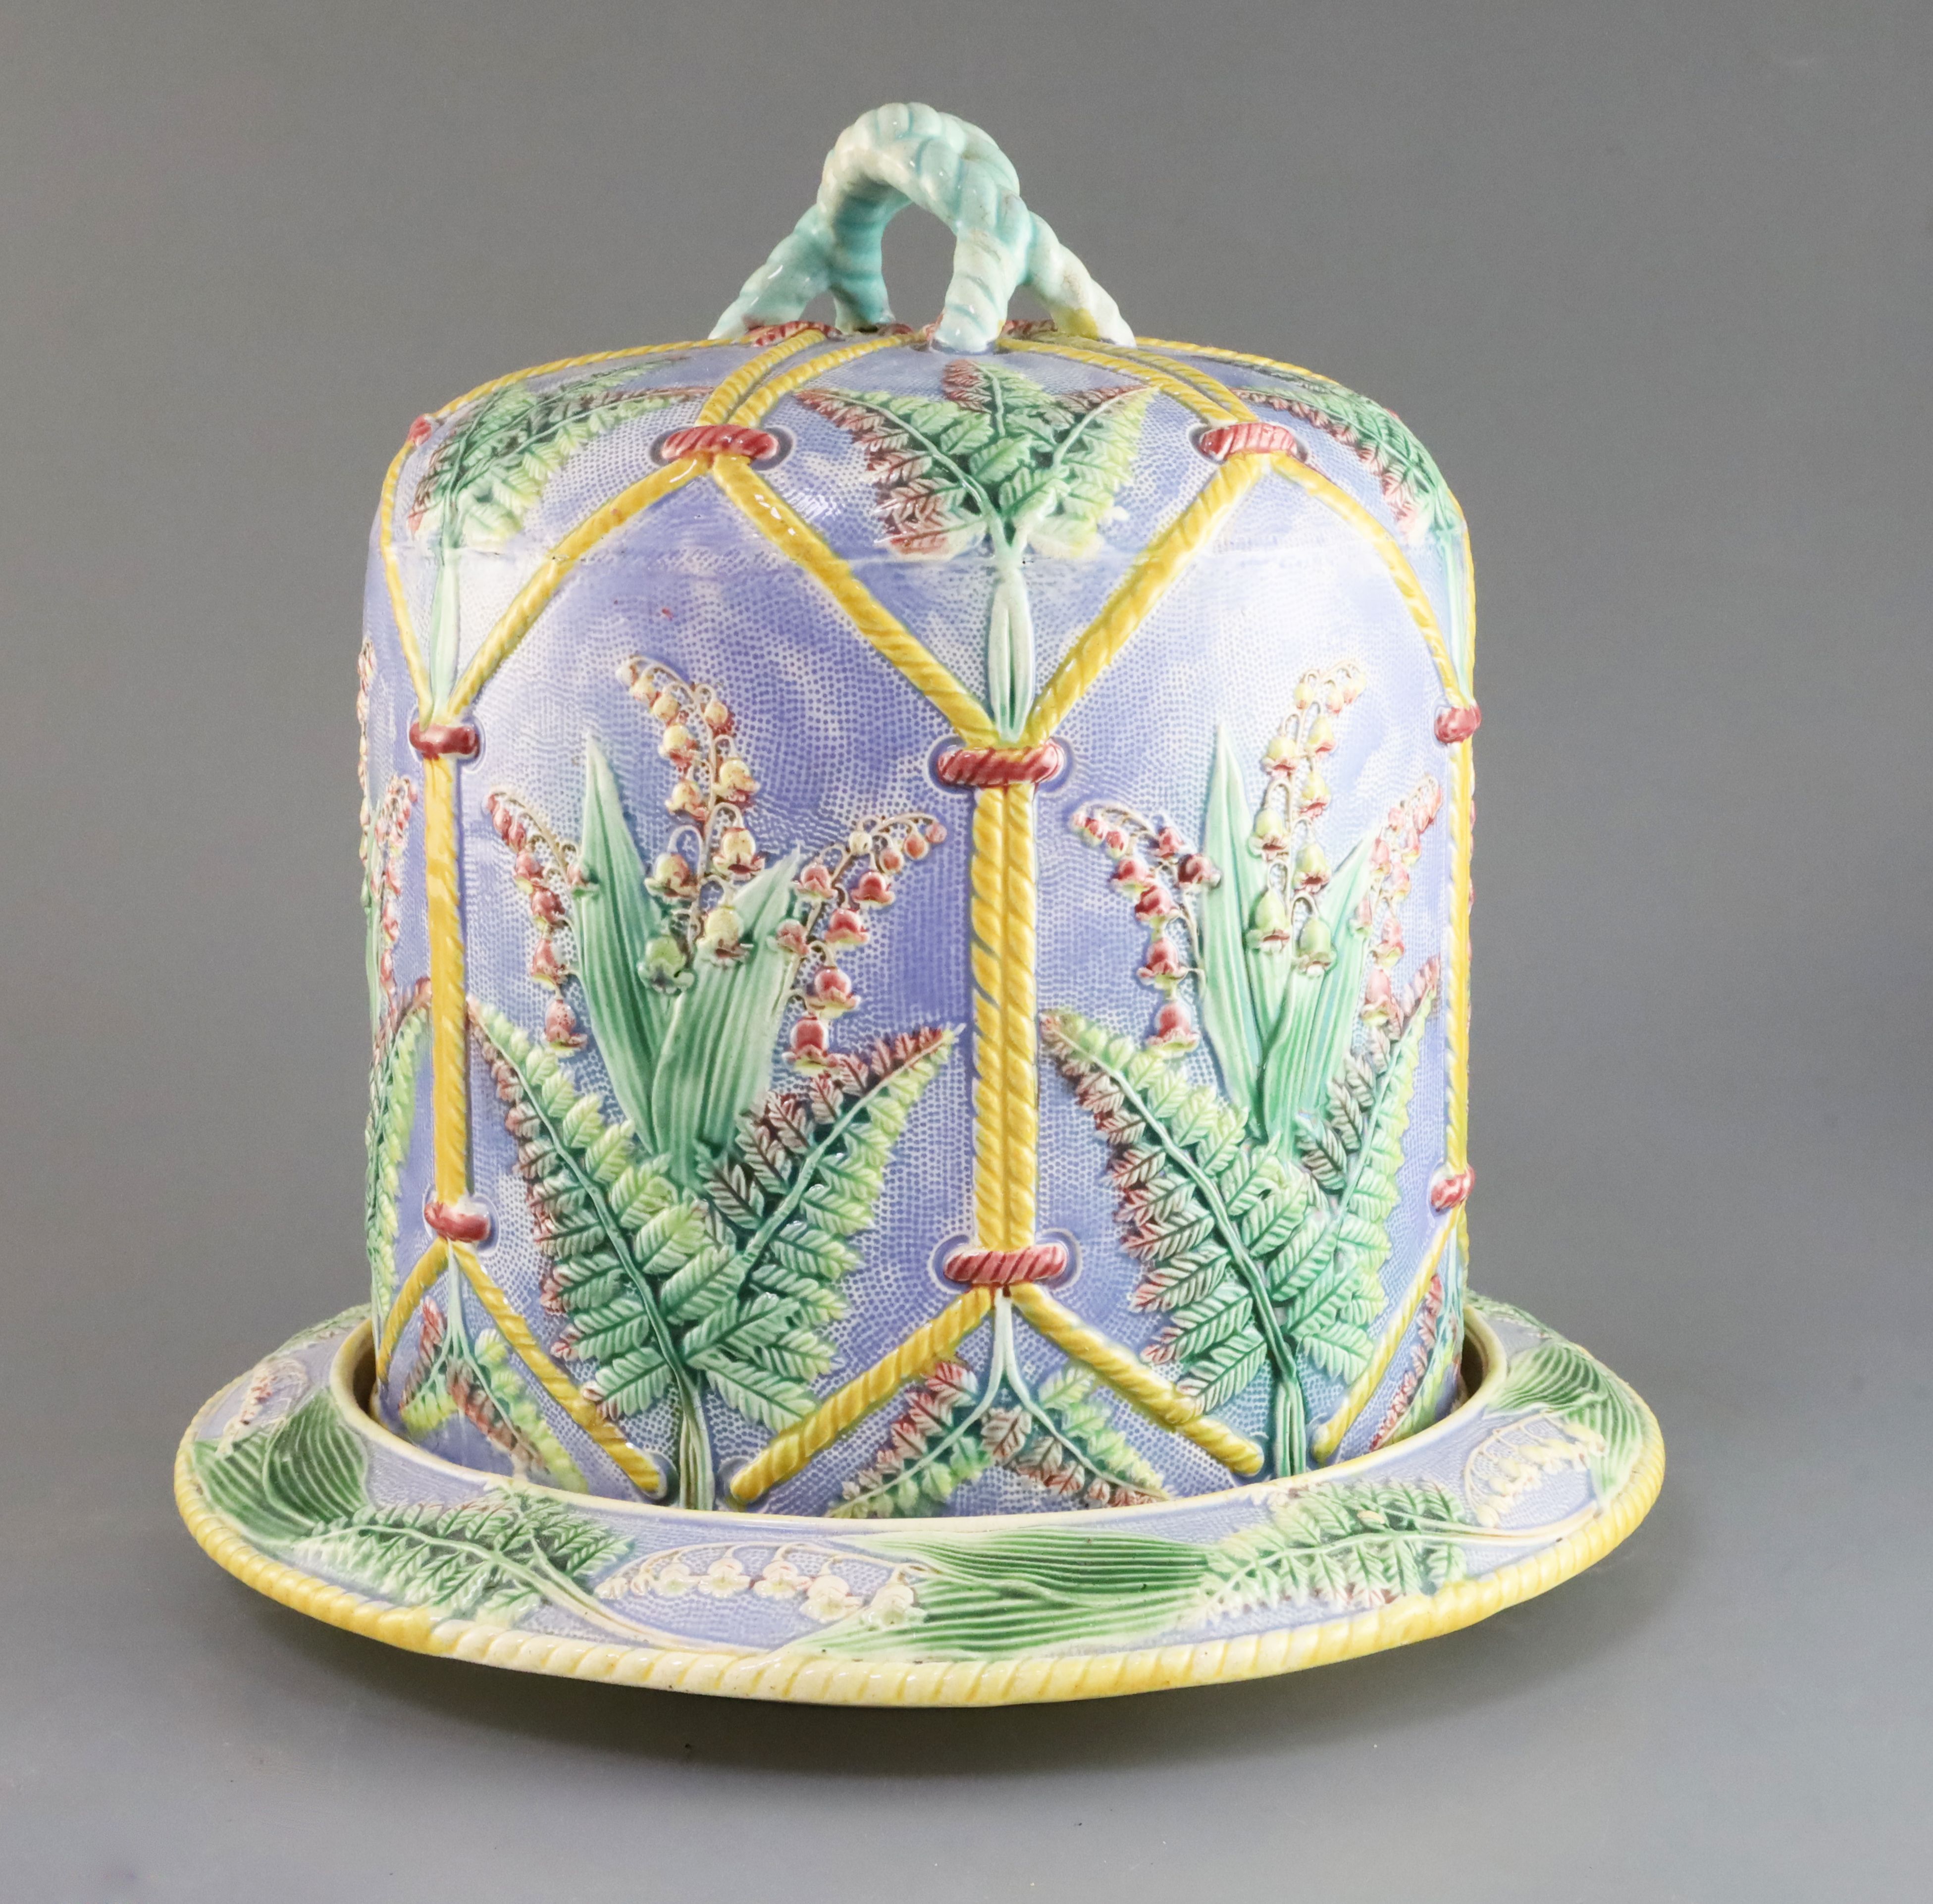 A Victorian majolica cheese dome and stand, decorated with ferns, H. 12.25in., faults